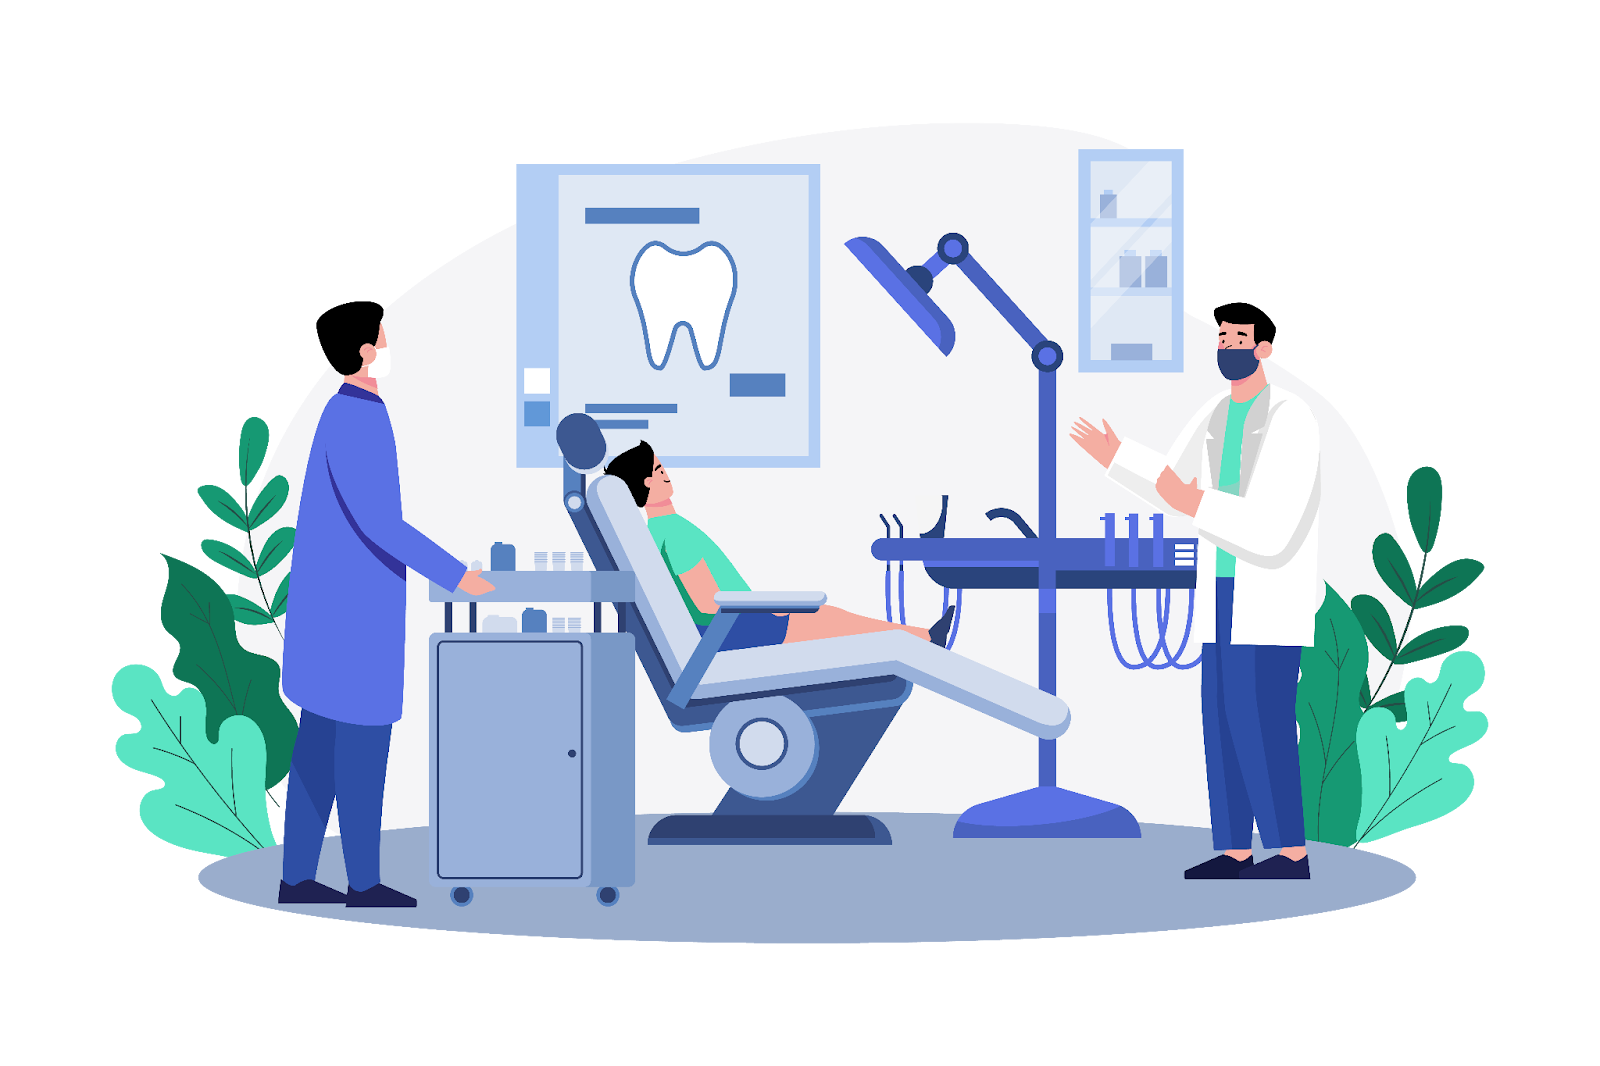 Discover how Bola, one of the top AI tools in healthcare, is transforming patient outcomes and streamlining processes for dental offices.